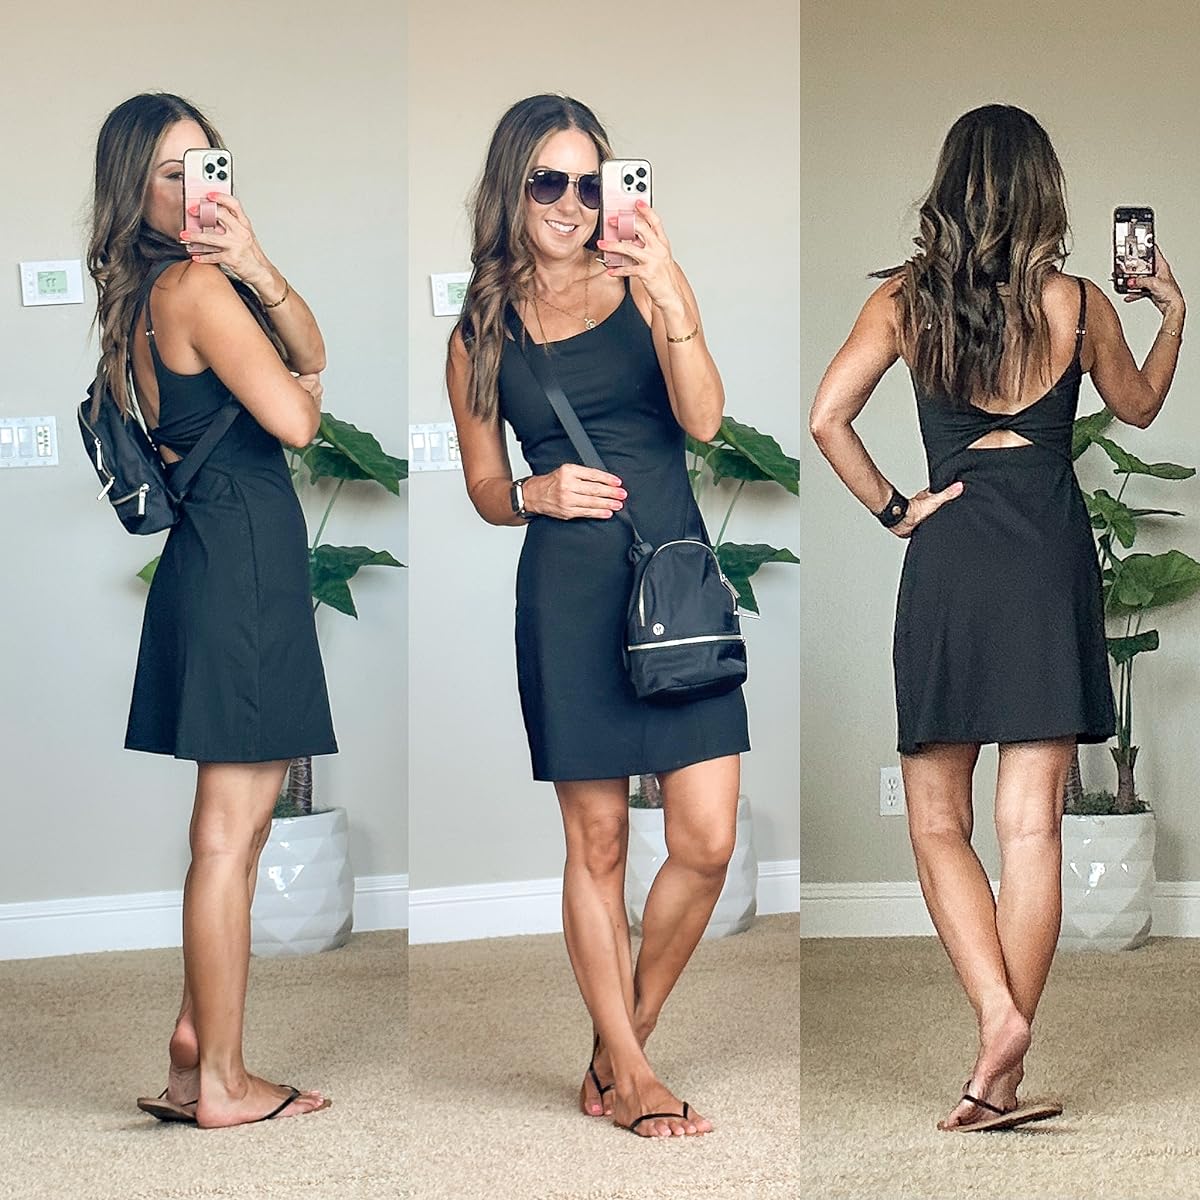 new and trending activewear + athleisure styles amazon | tennis dress, activewear, athleisure, theme park outfit, sandals, accessories, travel bag, backpack